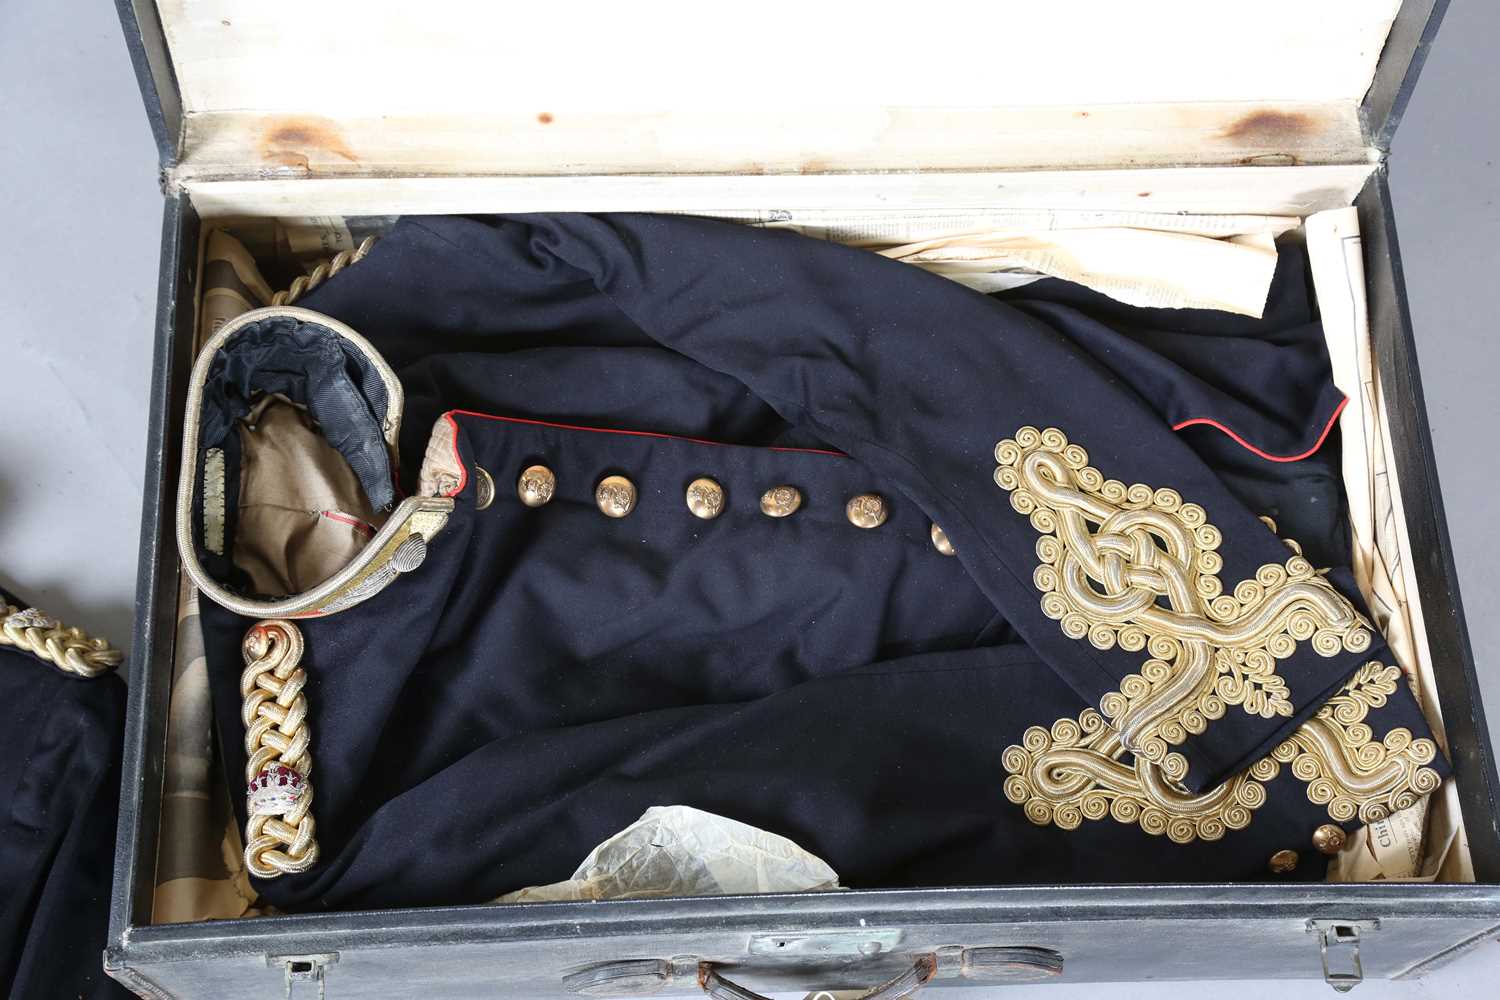 A late Victorian Royal Artillery officer's dress uniform, comprising two jackets, waistcoat, - Image 6 of 8